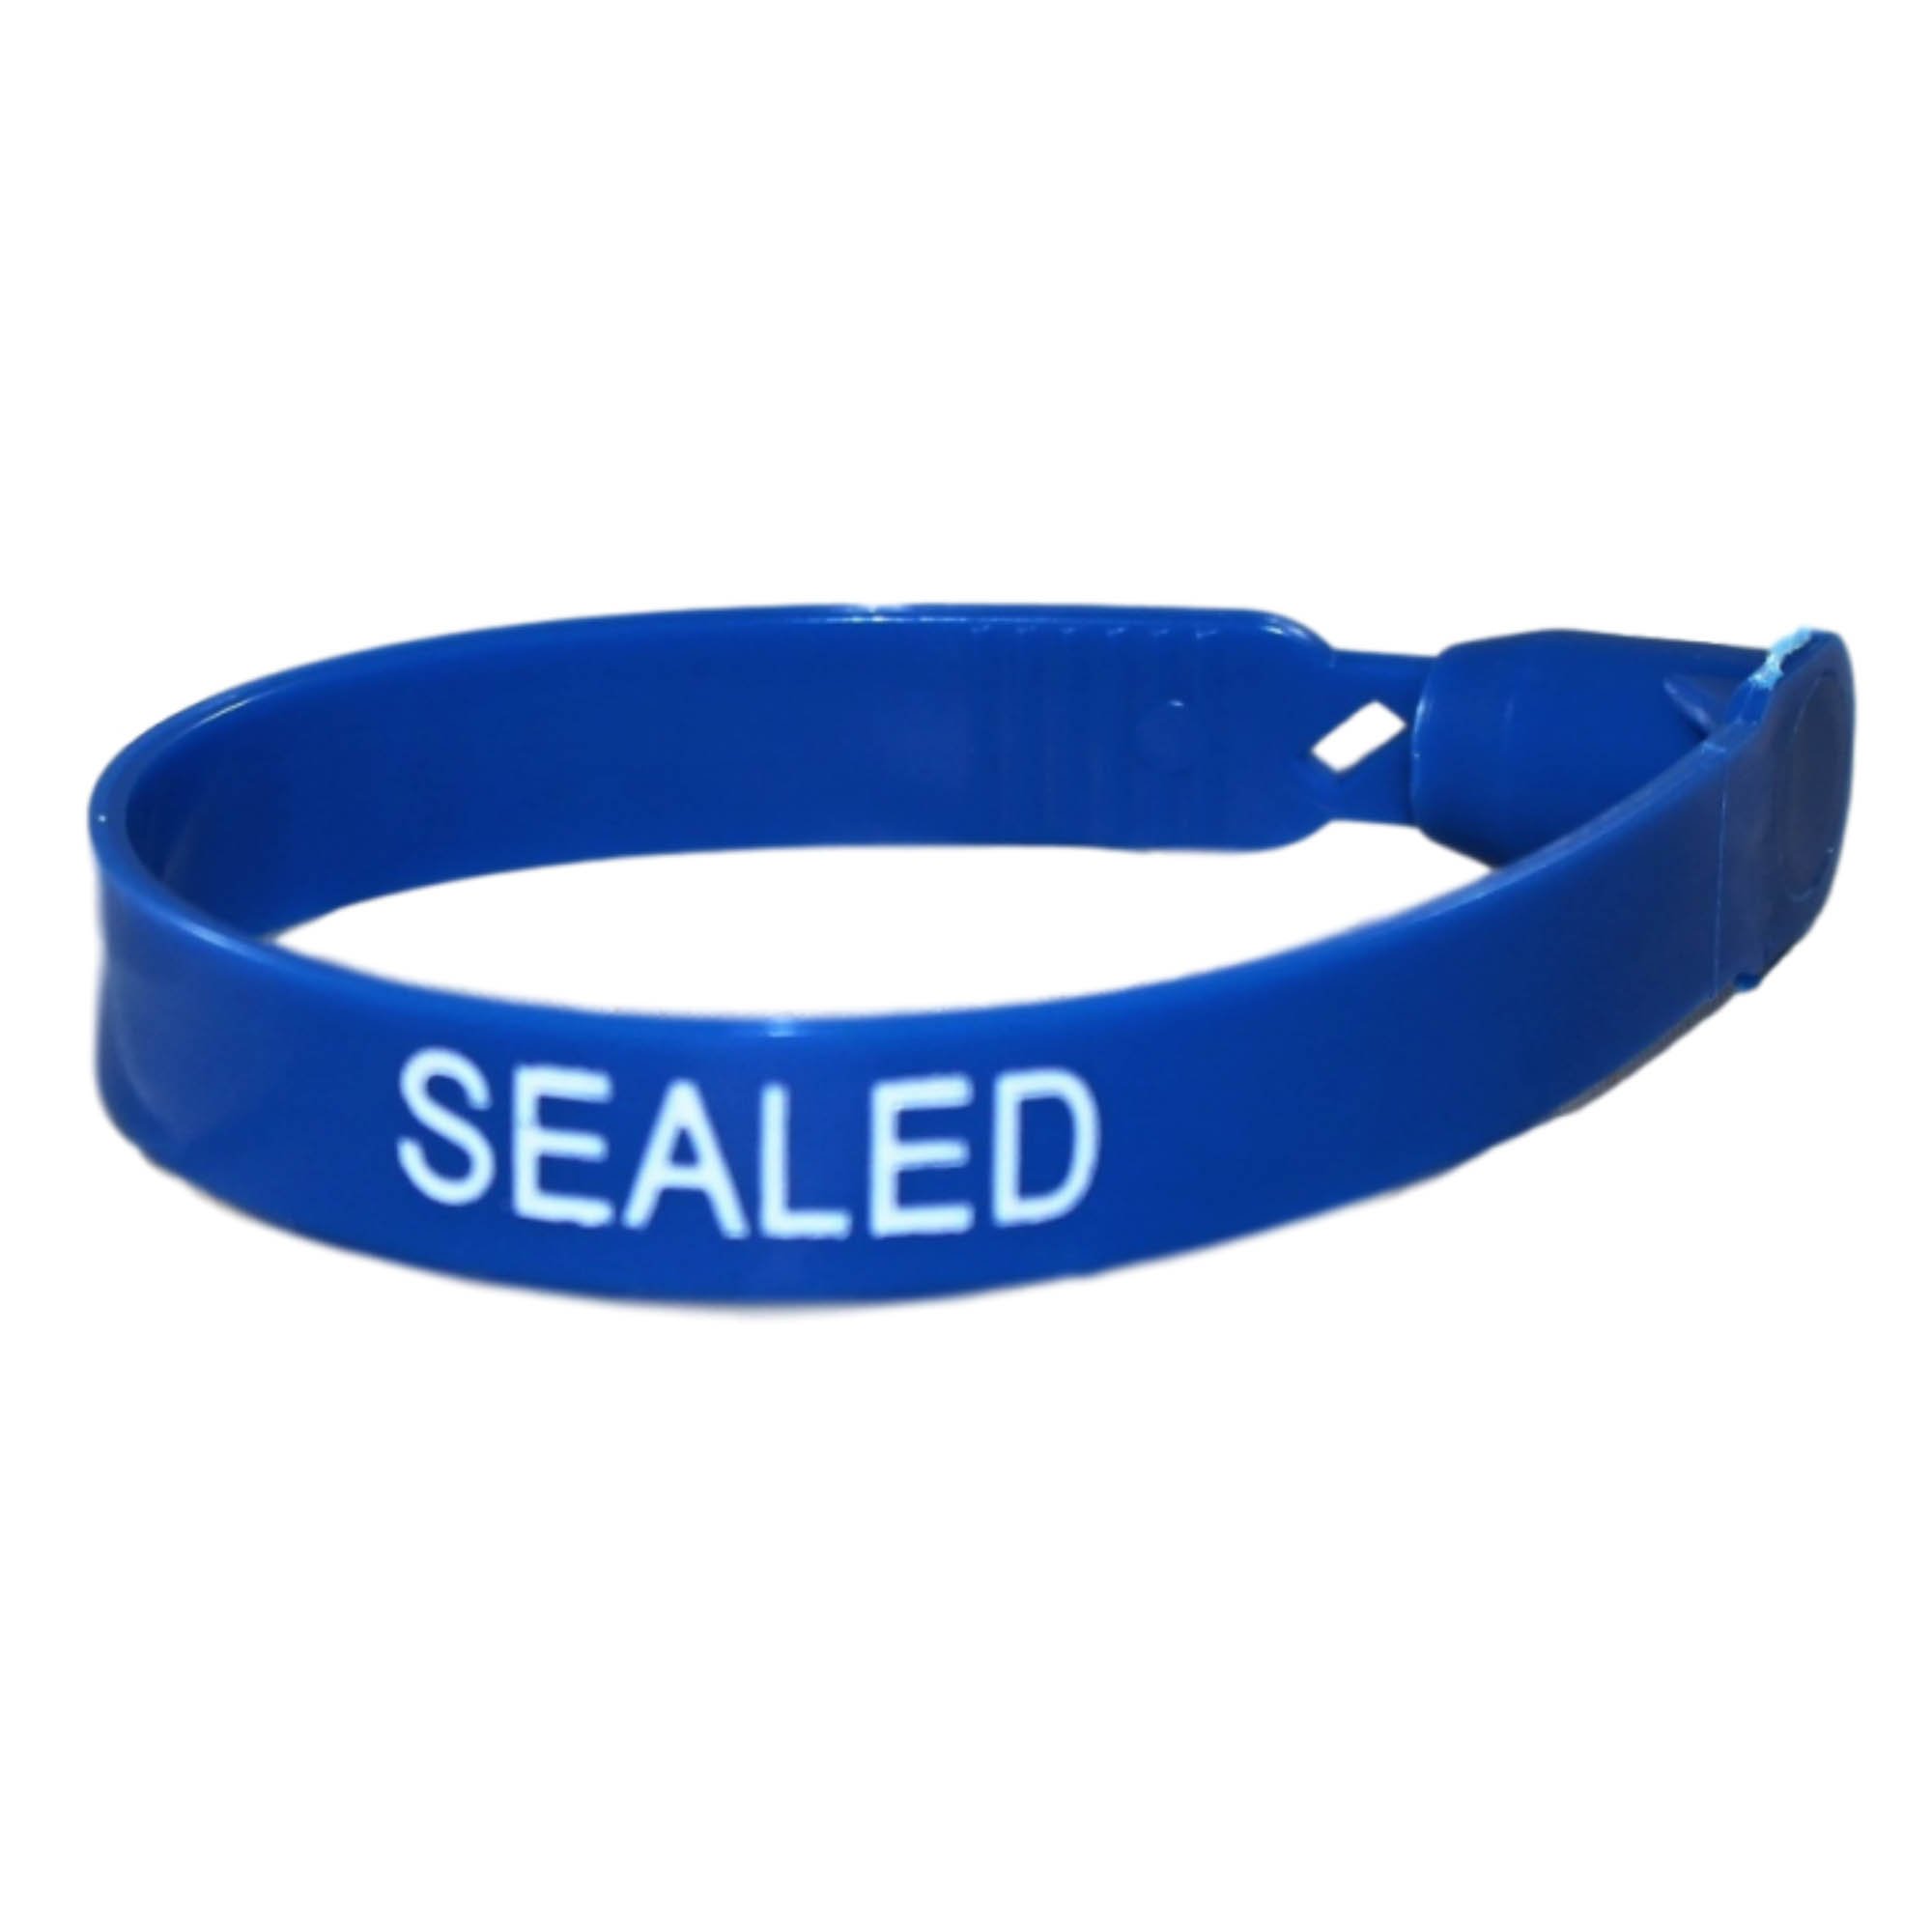 Plastic Numbered Transport Seals in Blue